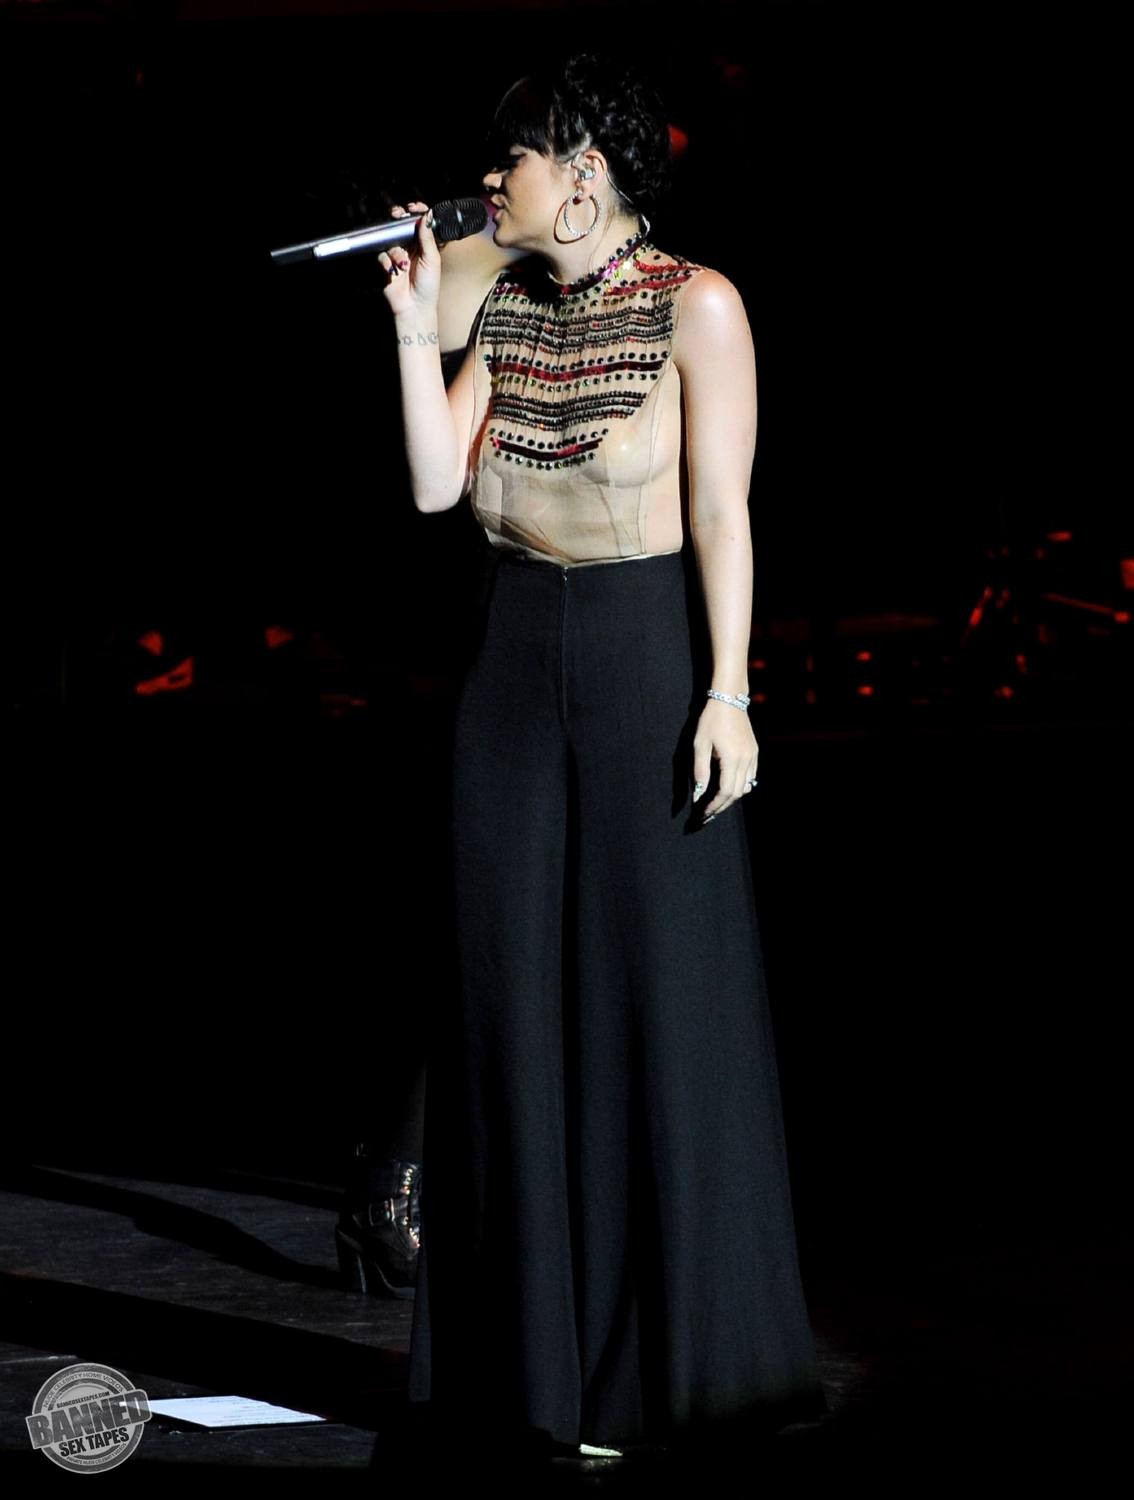 Lily Allen  see her nude tits through transparent top during concert #75191580